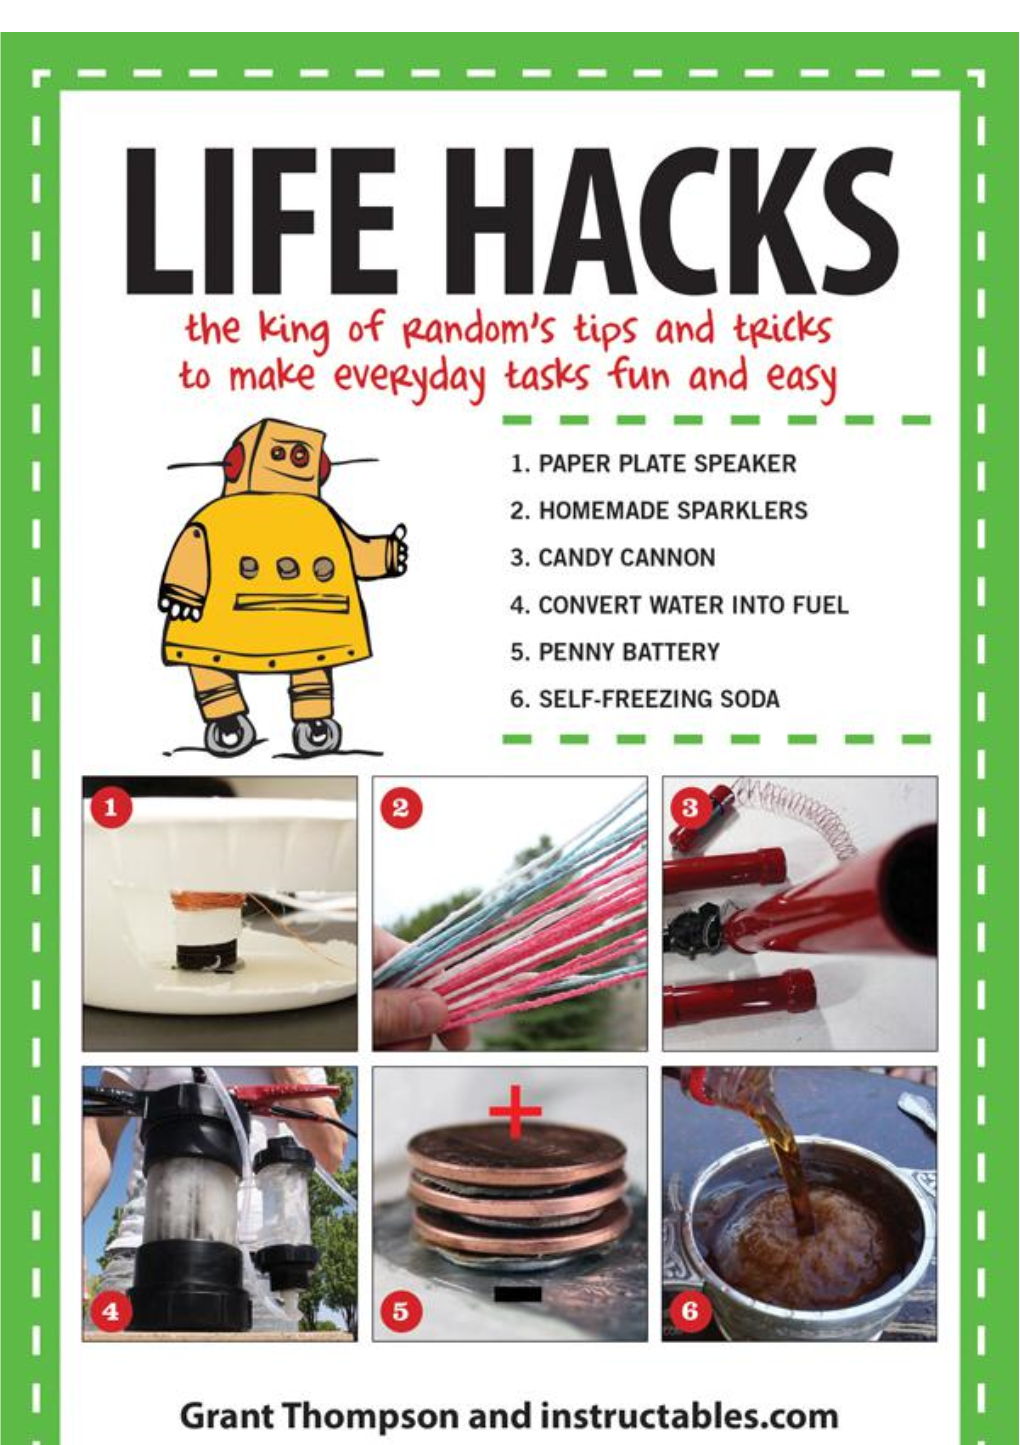 Life Hacks You Need to Know for a Better Summer!